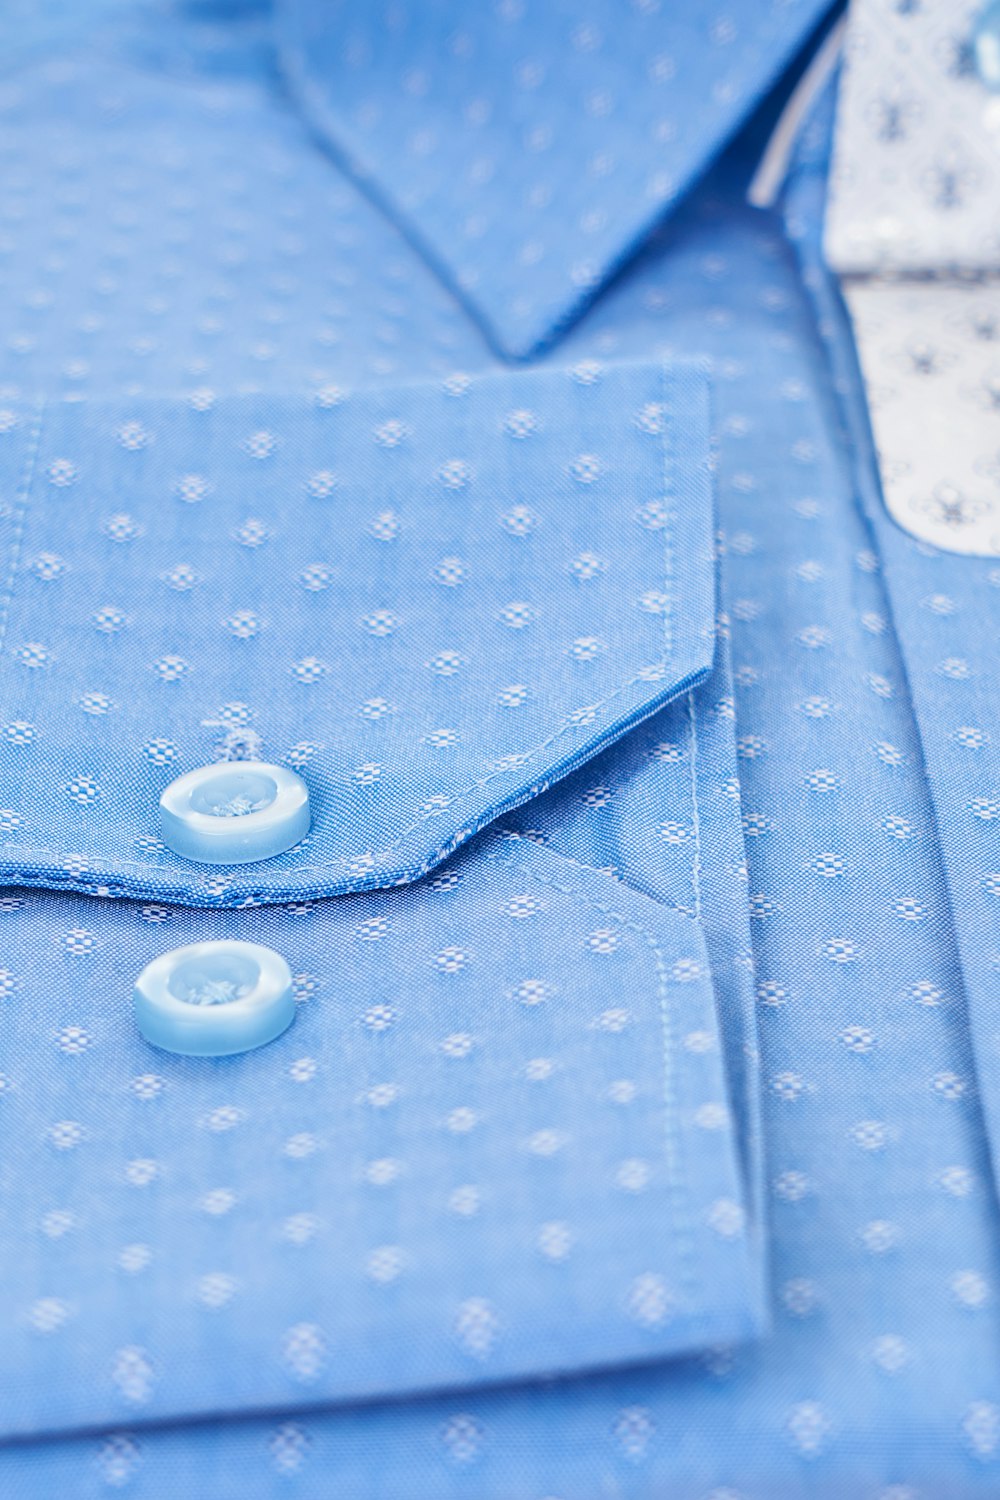 a close up of a blue shirt with buttons